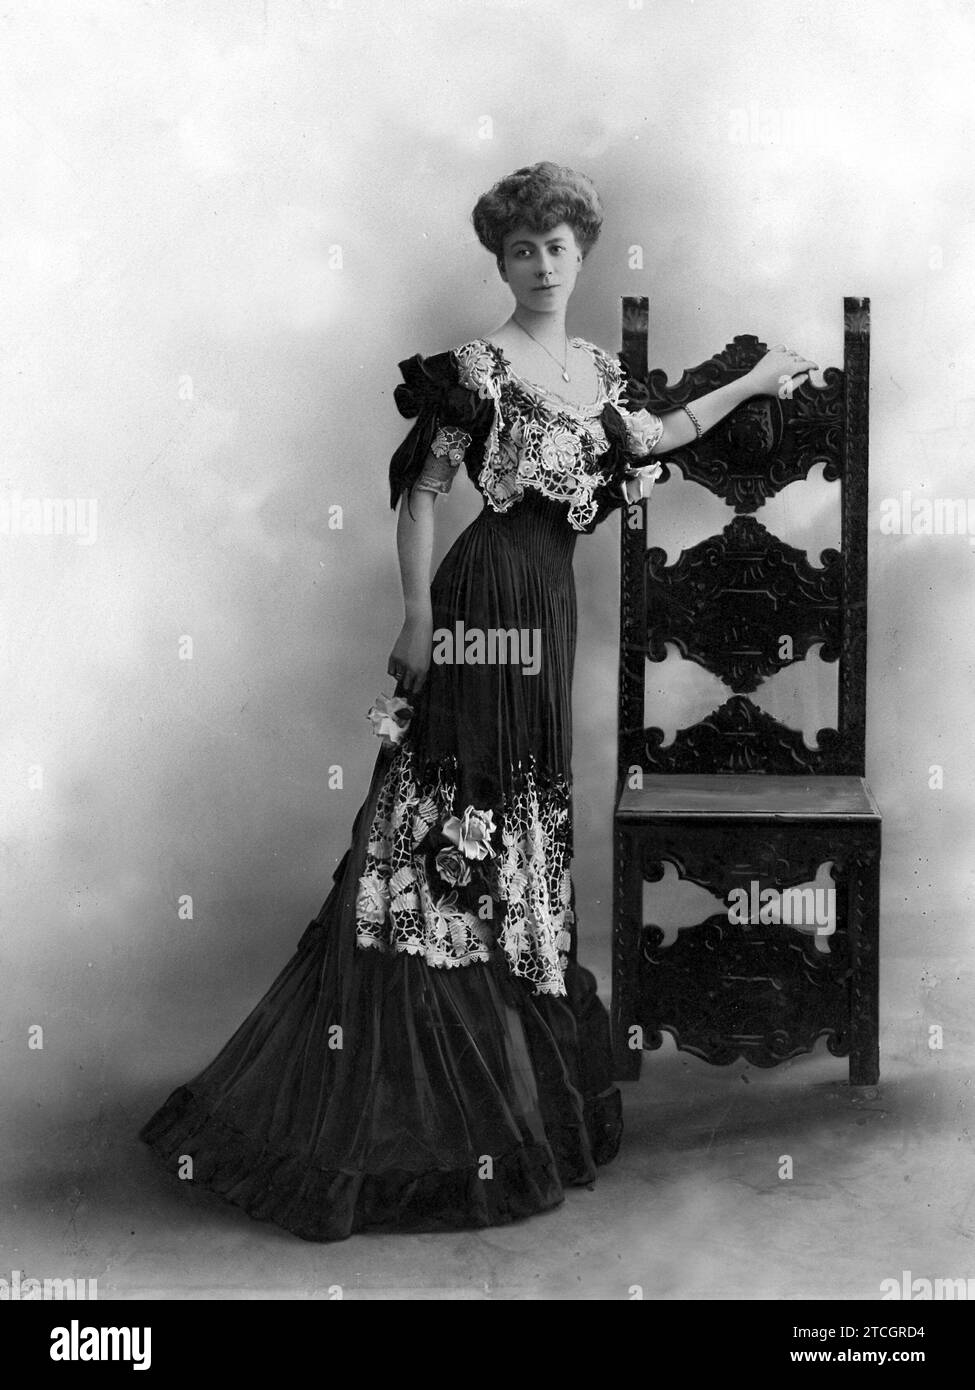 05/31/1906. Empire suit, made of black silk muslin, semi-adjusted at the waist. Velvet Broadband; Venice Guipure inlays with Large Roses on Black tulle. In the Body, Venetian Guipure flounce with Large Roses. Alangas Made with a black silk muslin bow and a Guipure bracelet. Credit: Album / Archivo ABC Stock Photo